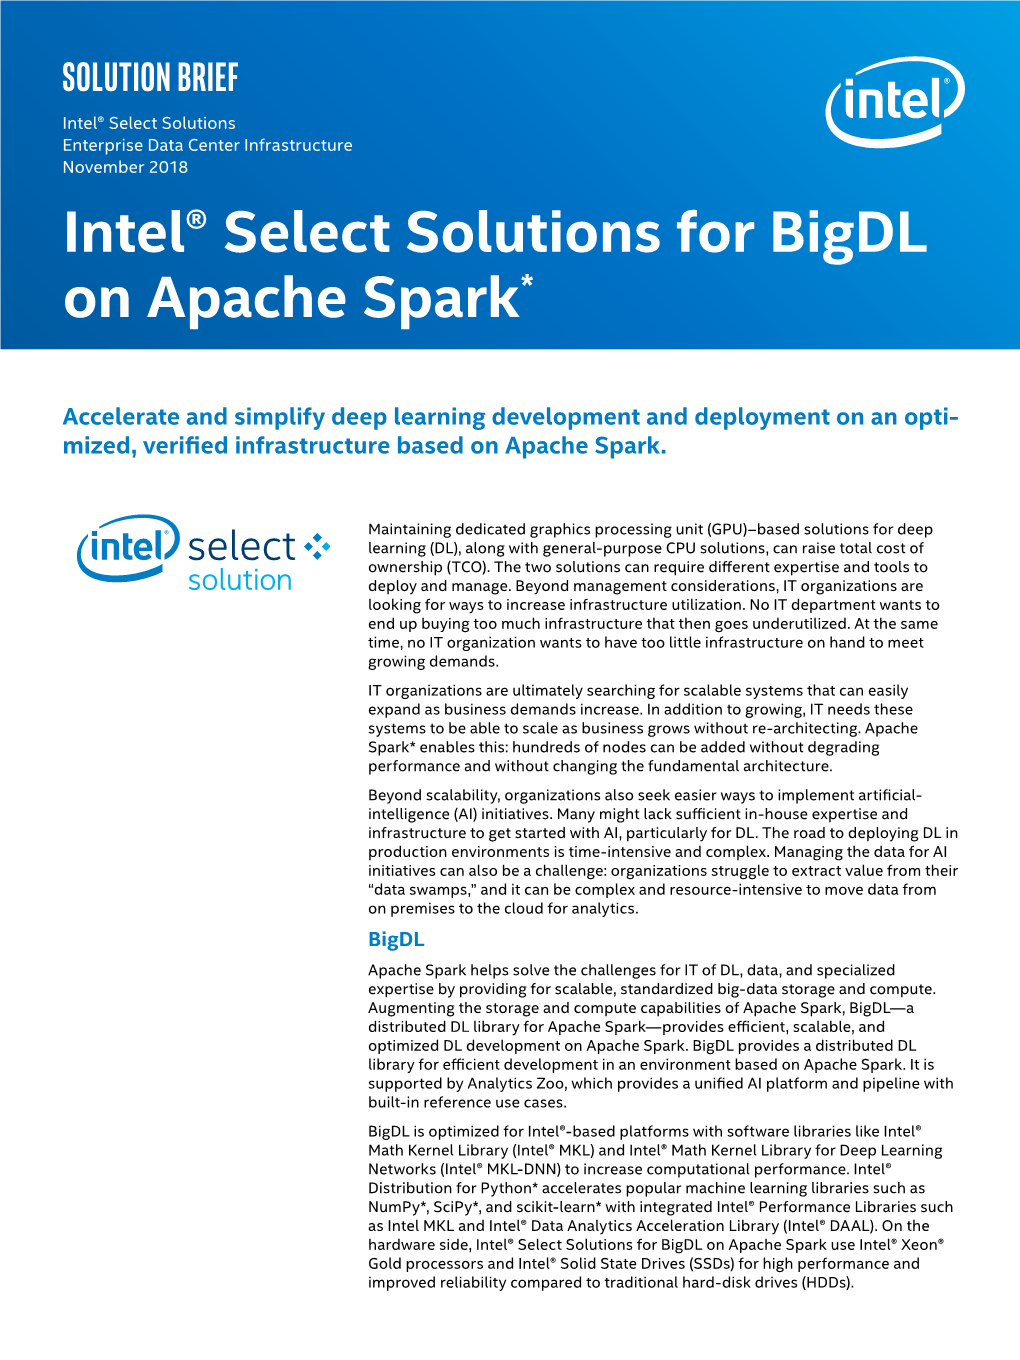 Intel® Select Solutions for Bigdl on Apache Spark*